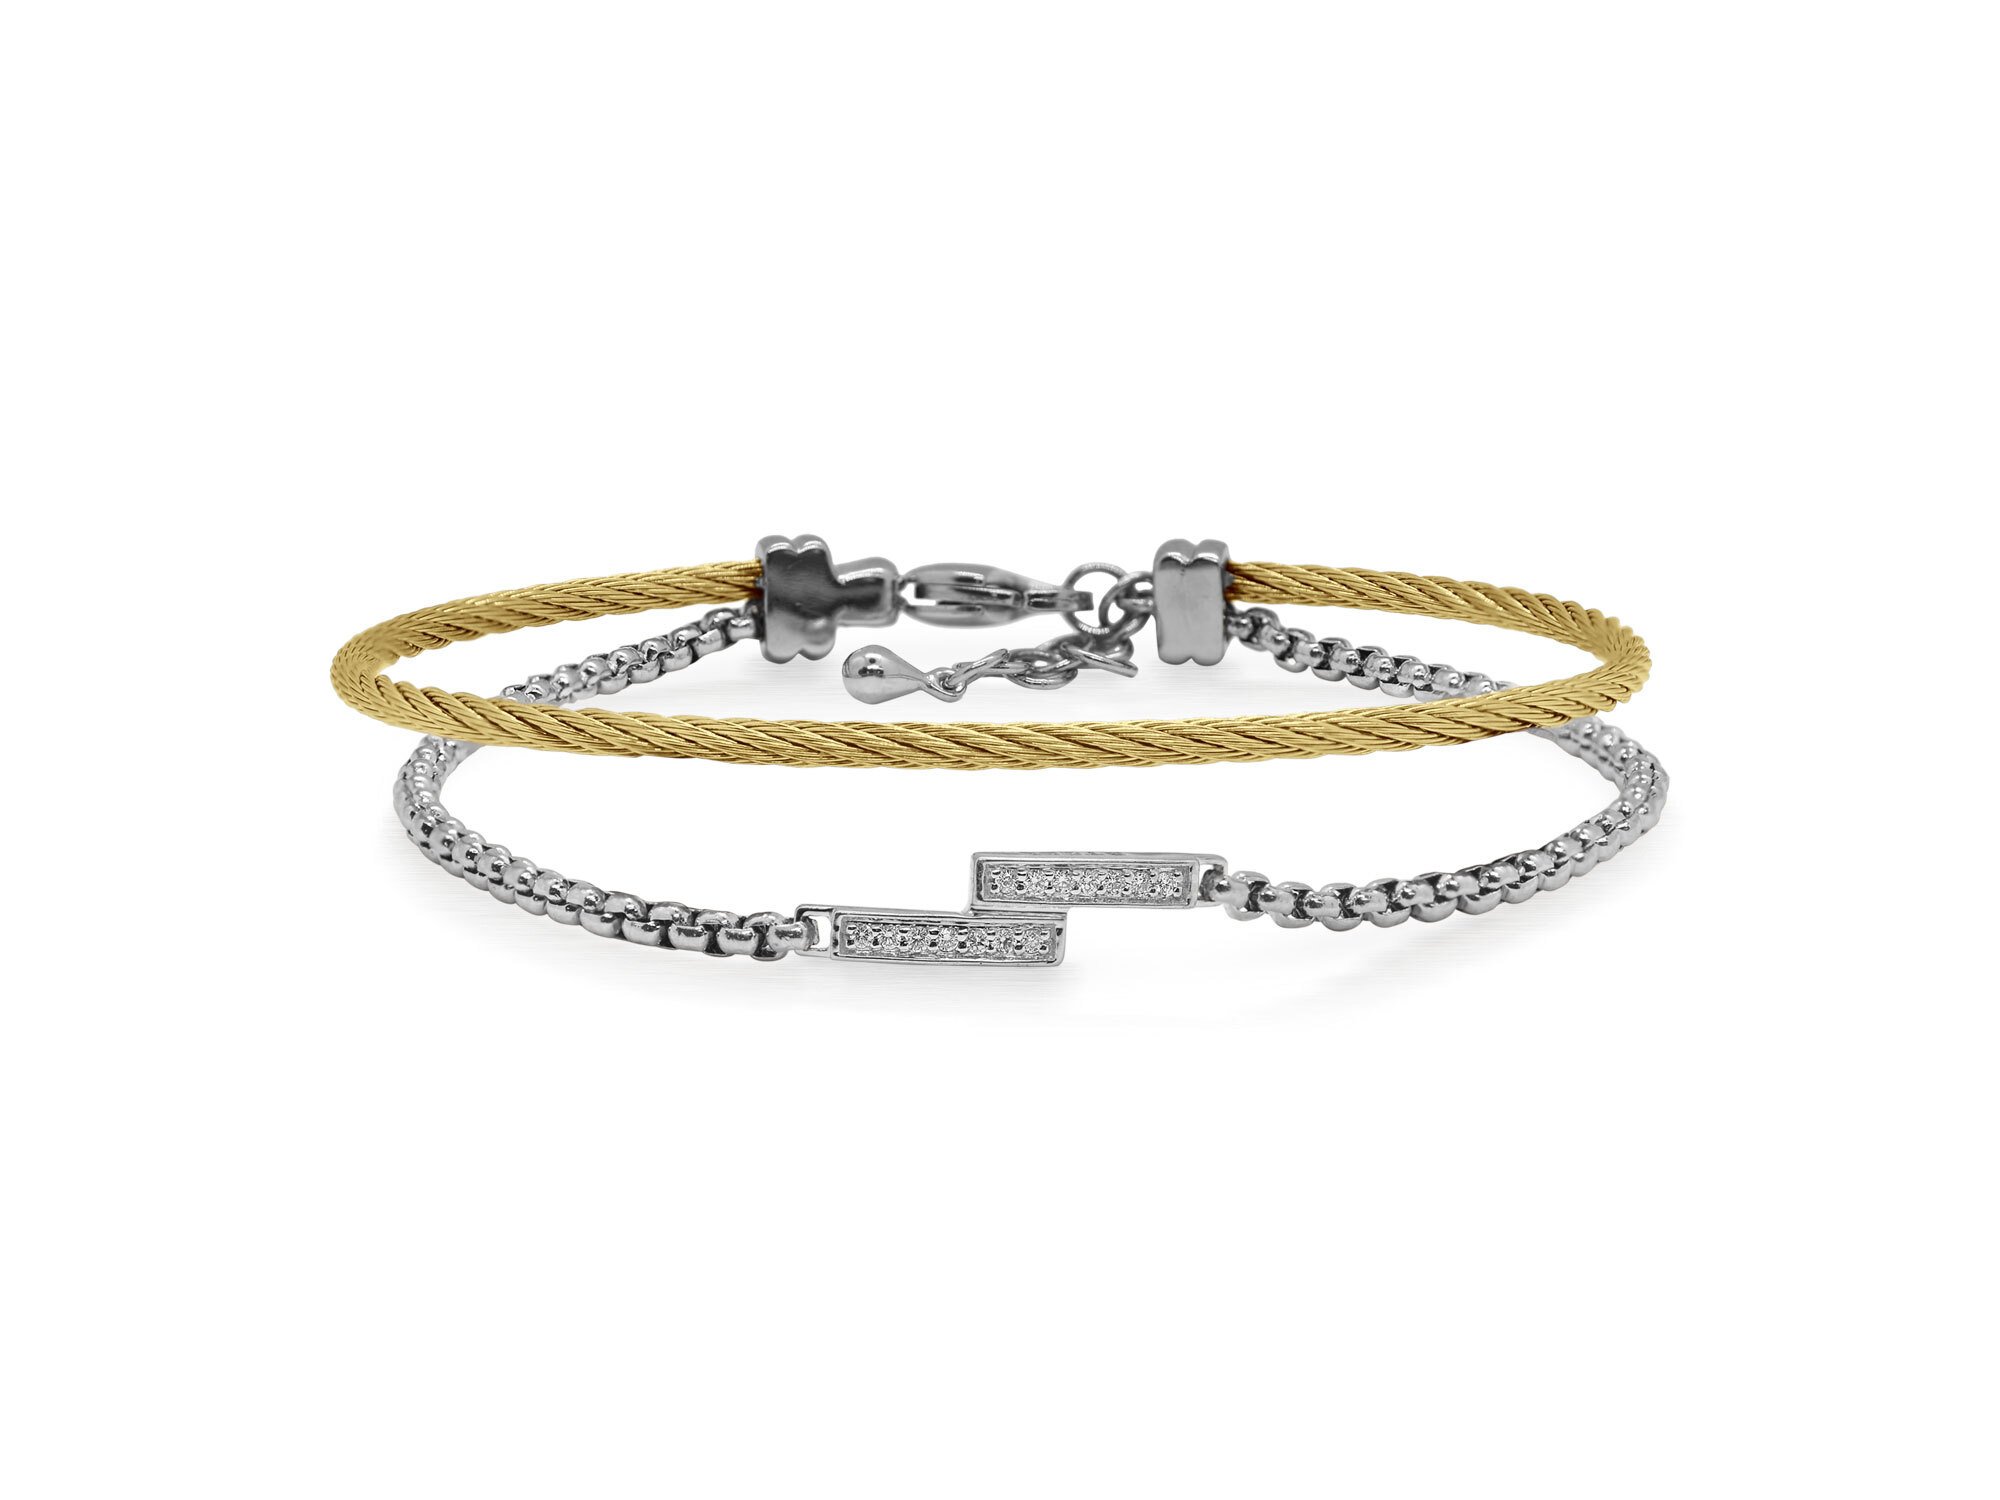 Grey Chain & Yellow Cable Intermix Bracelet with 14kt White Gold & Diamonds – ALOR